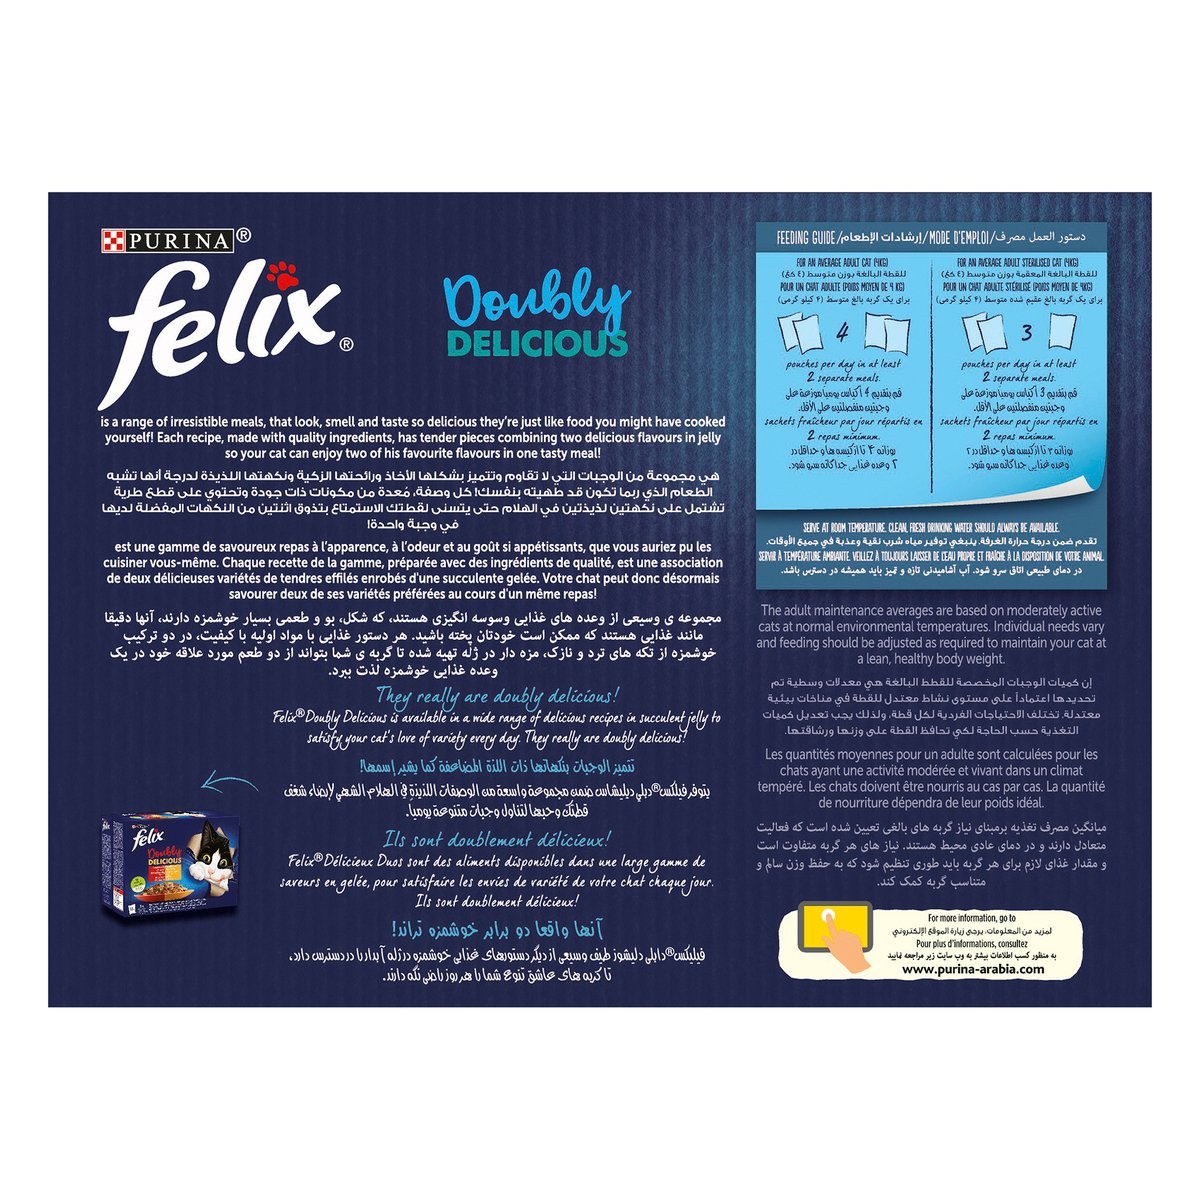 Purina Wet Cat Food Felix Doubly Delicious Fish Selection In Jelly 12 x 85 g